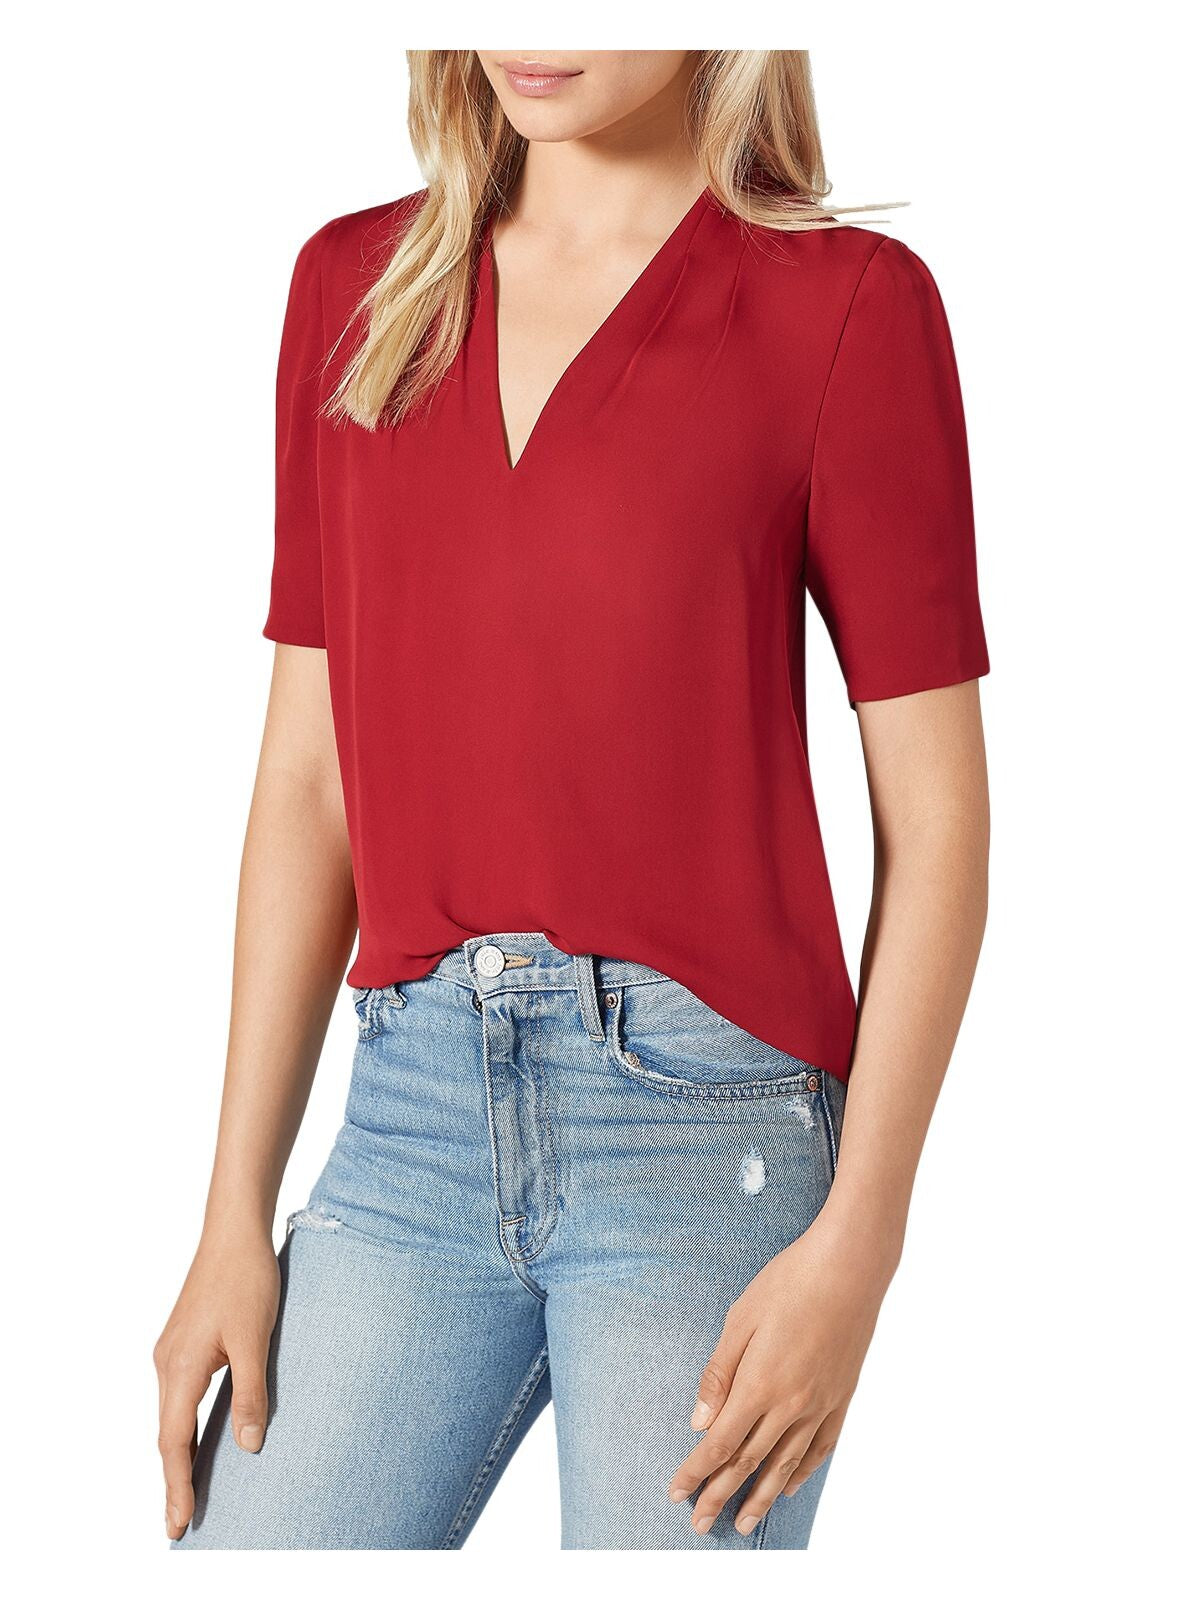 JOIE Womens Red Pouf Sleeve V Neck Blouse XS